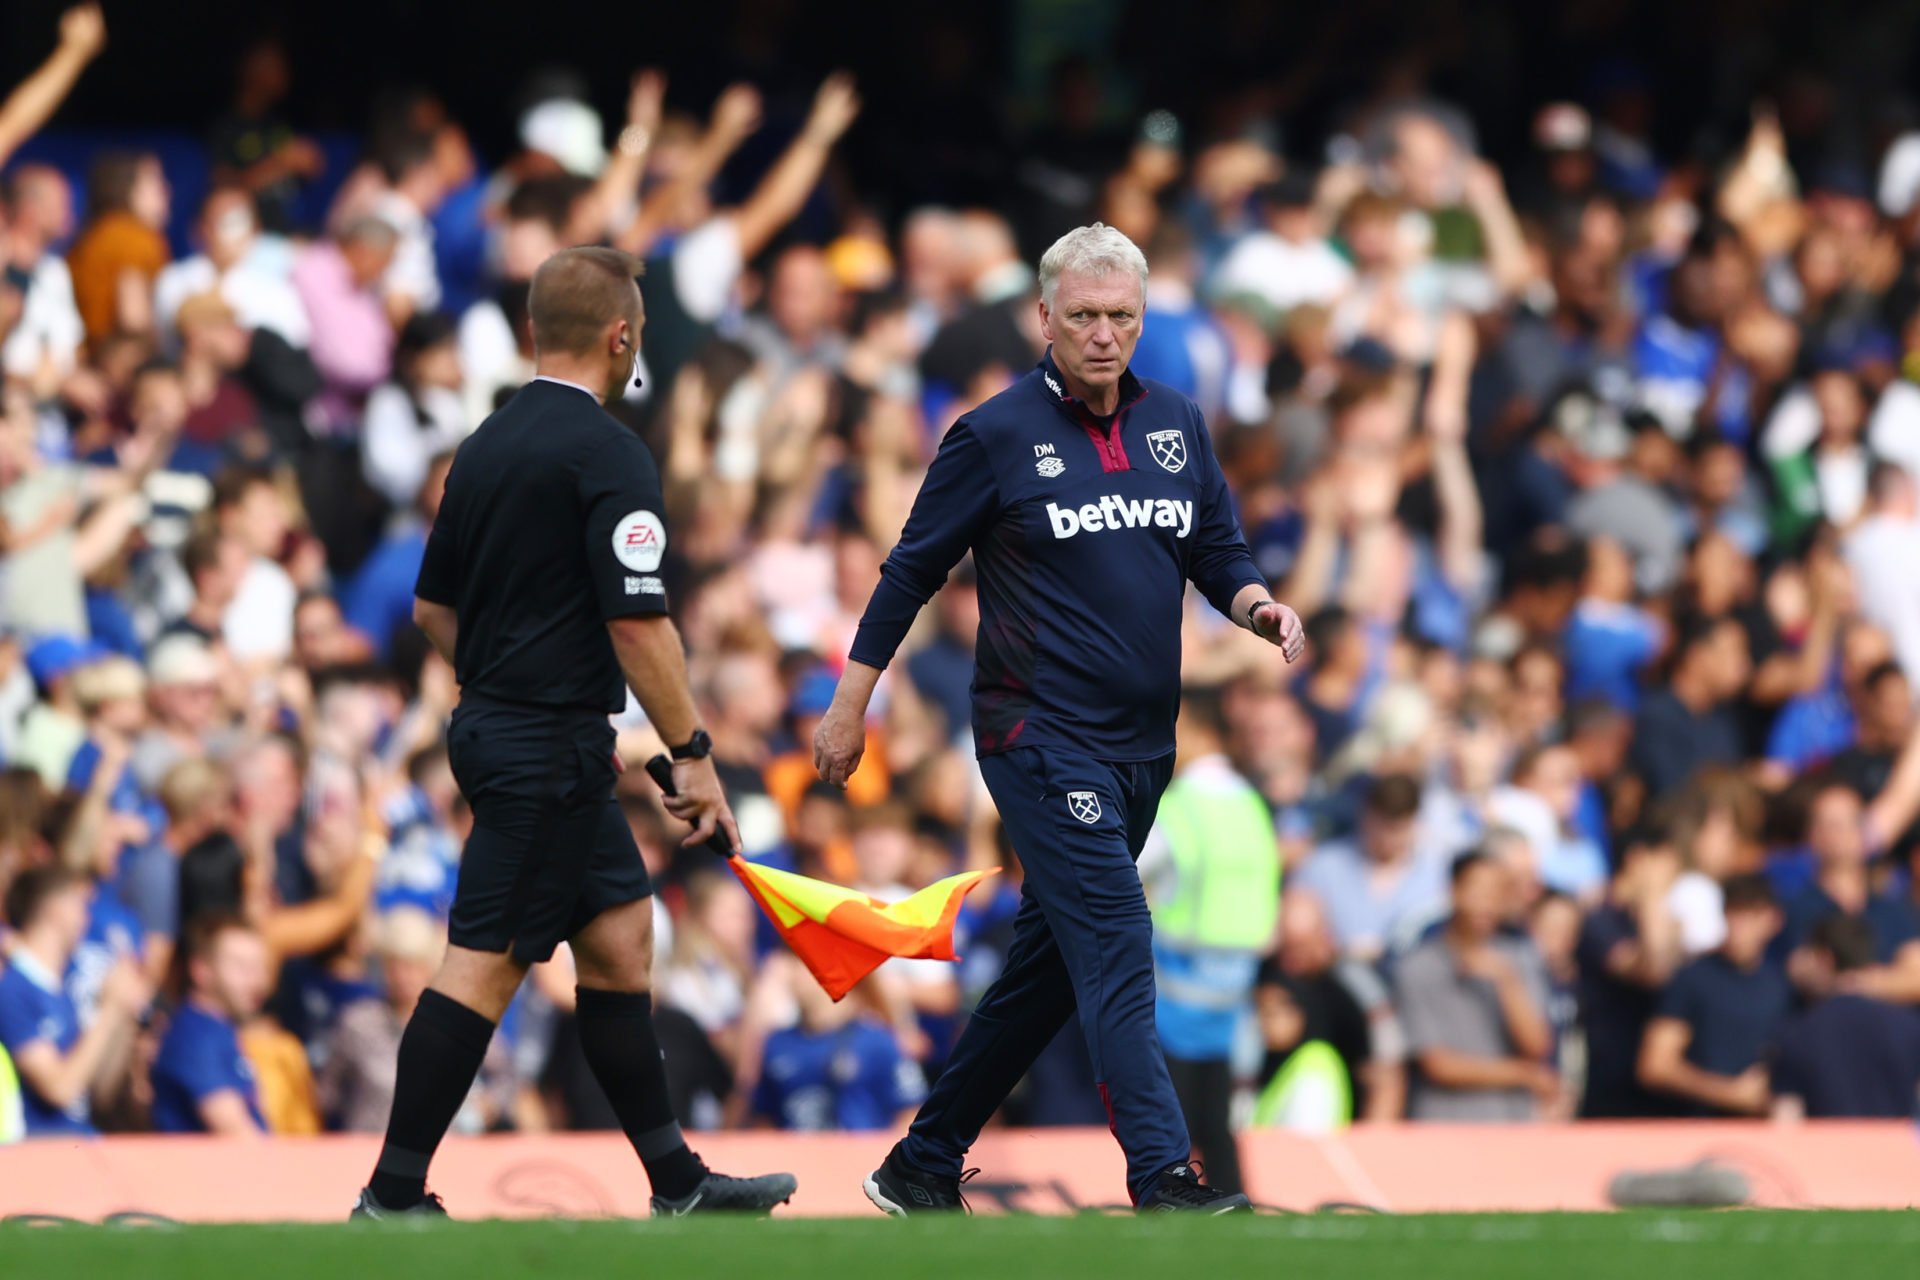 David Moyes is dangerously underestimating the severity of West Ham’s current situation